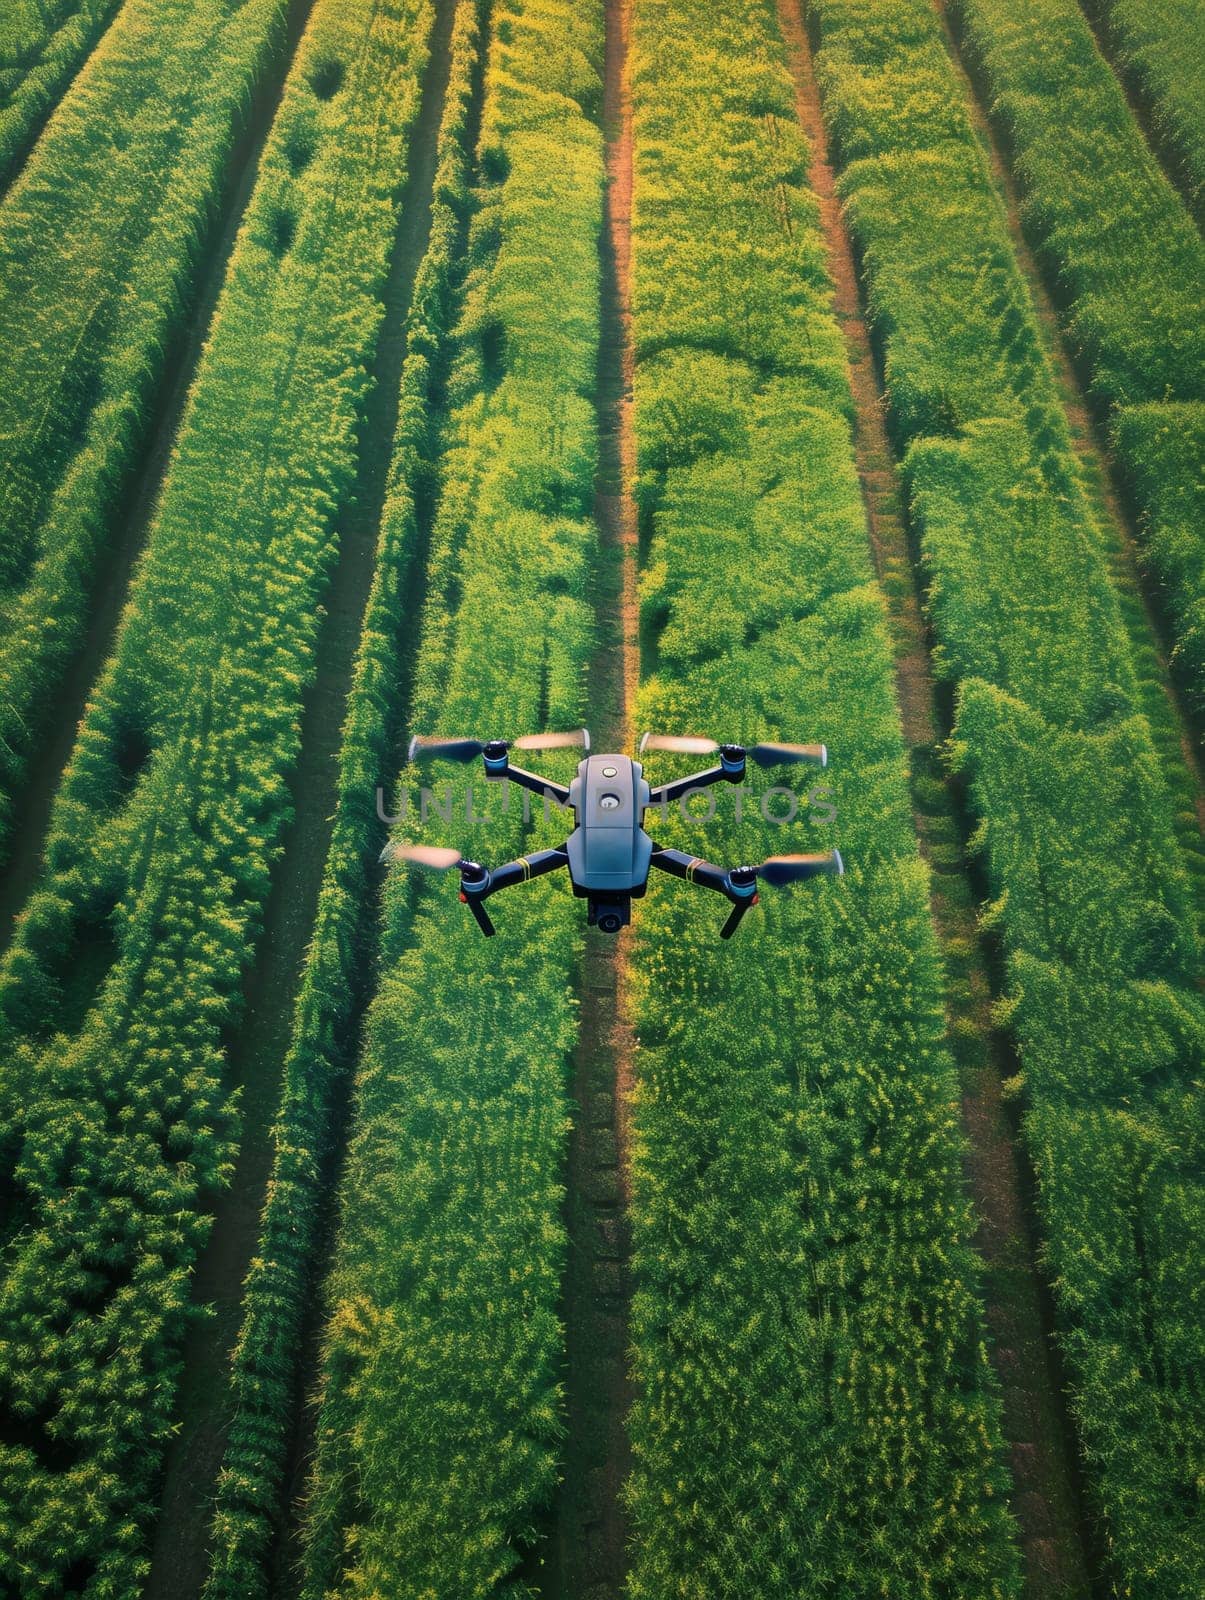 A drone surveys the lush, sunlit crop fields, capturing the essence of modern agriculture and effective land management. Organized rows exemplify careful cultivation and farming efficiency. by sfinks